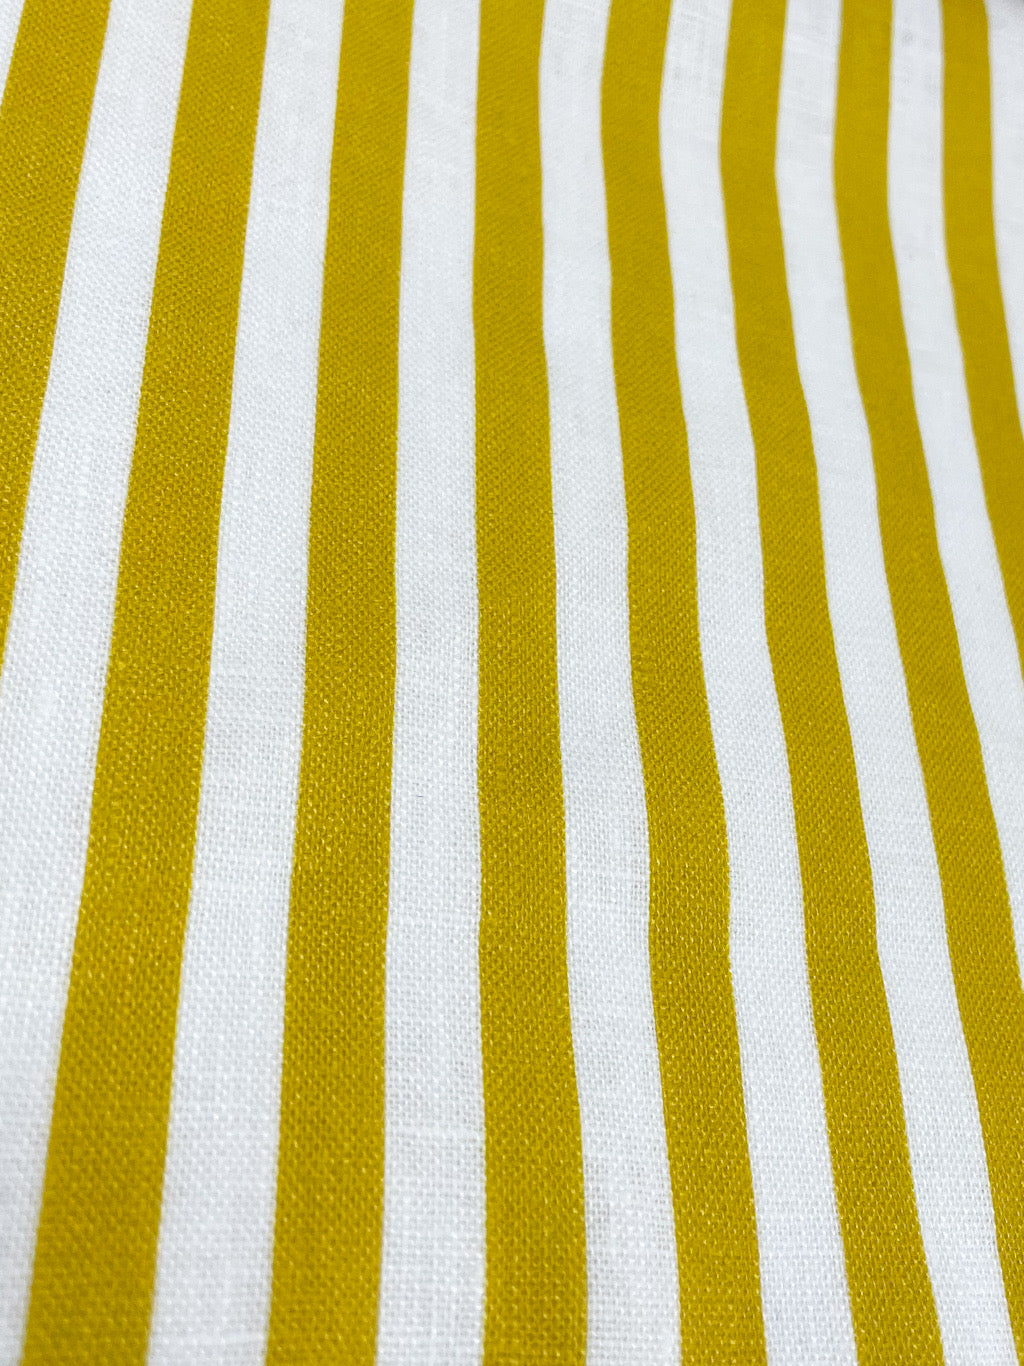 3/8" Narrow Stripe 100% Natural Linen Fabric By The Yard, Curtain, Drapery, Table Top, 57" Width/CL1102